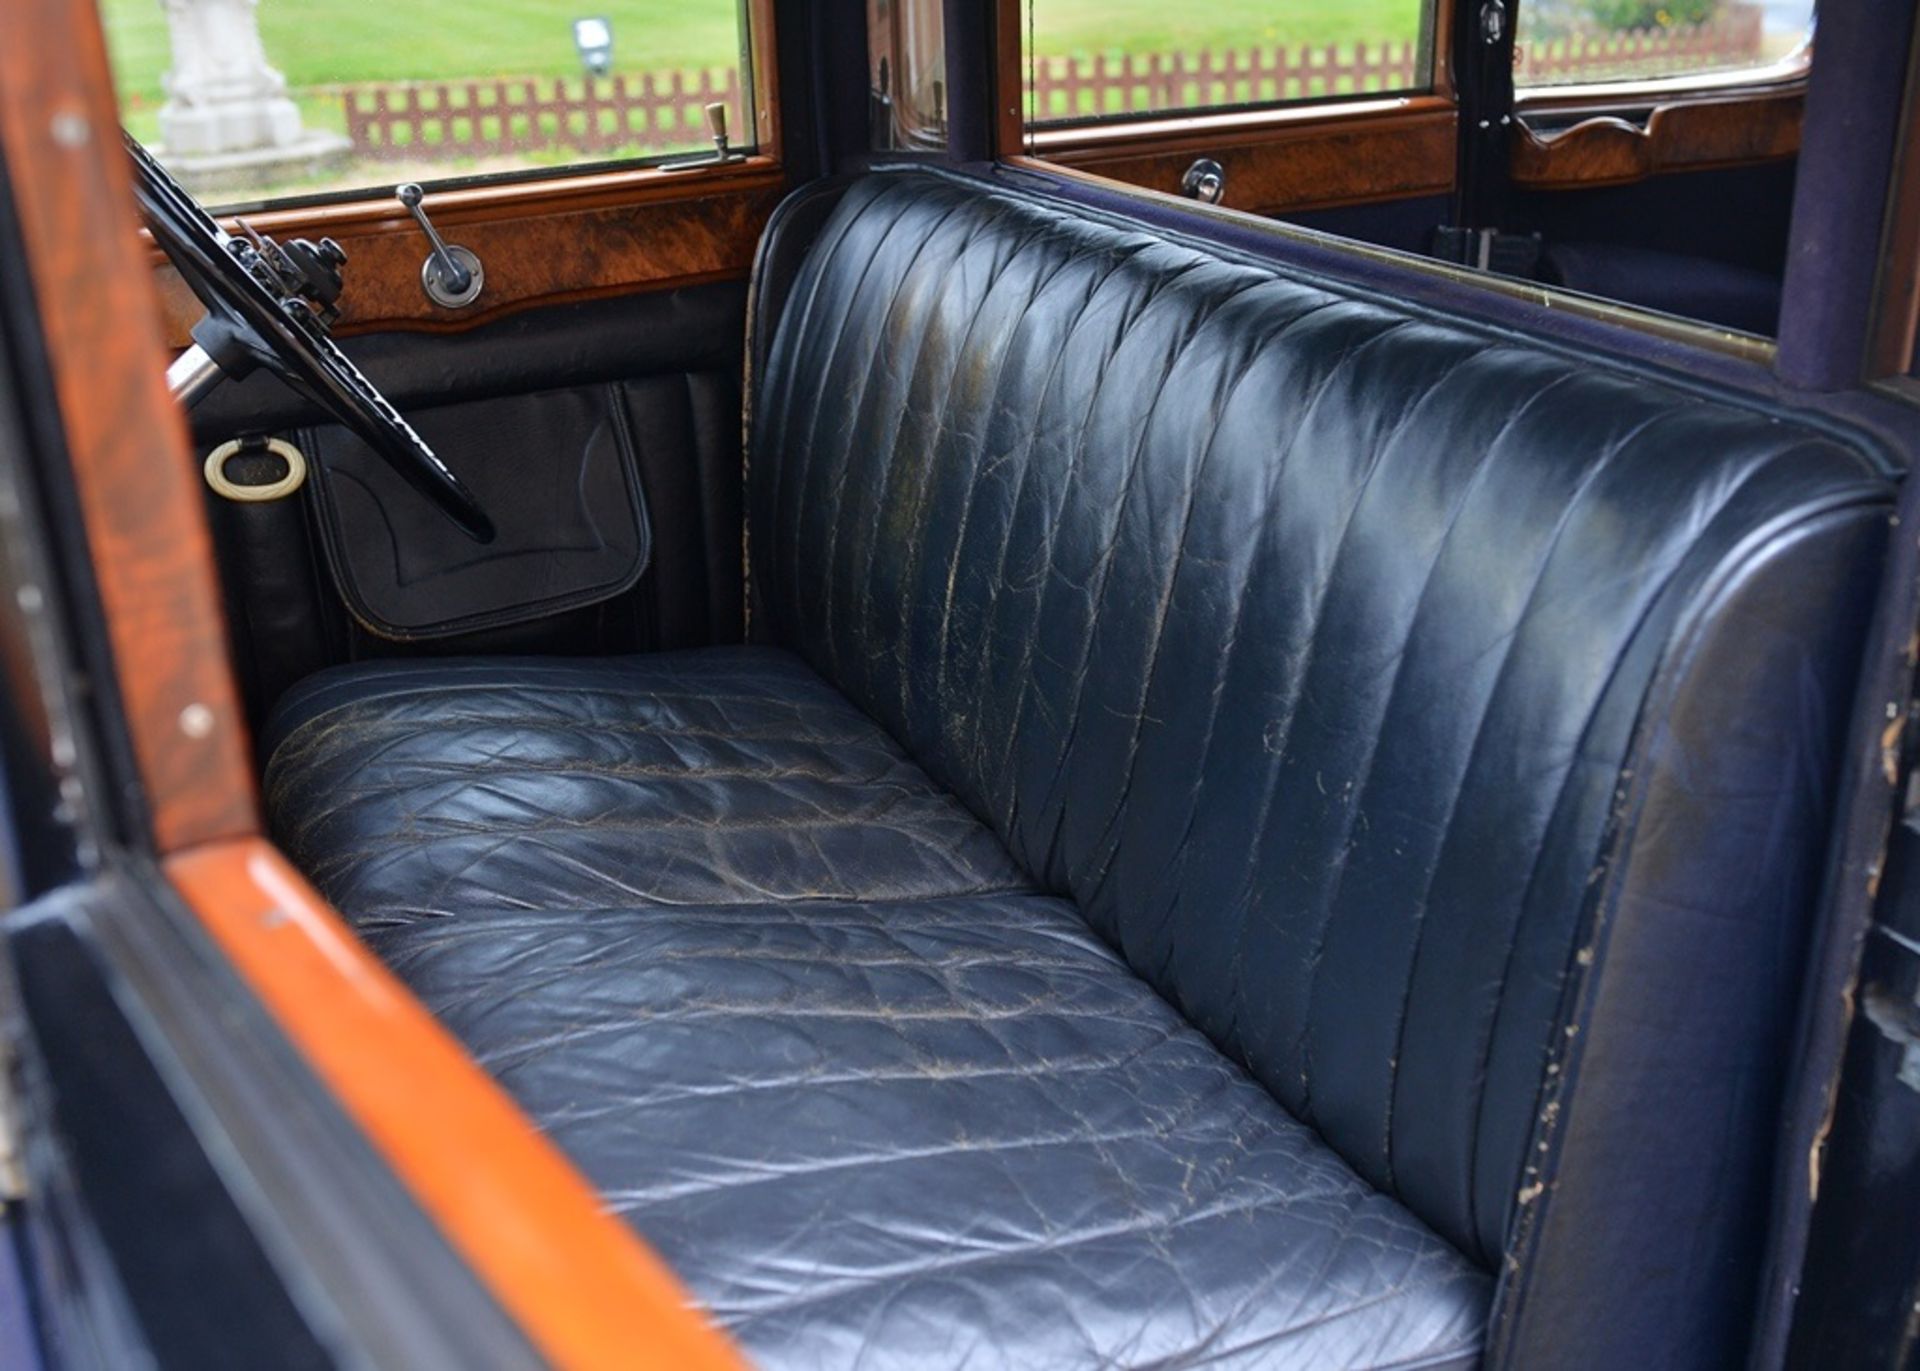 1932 Rolls-Royce 20/25 Limousine by Crosbie & Dunn - Image 7 of 16